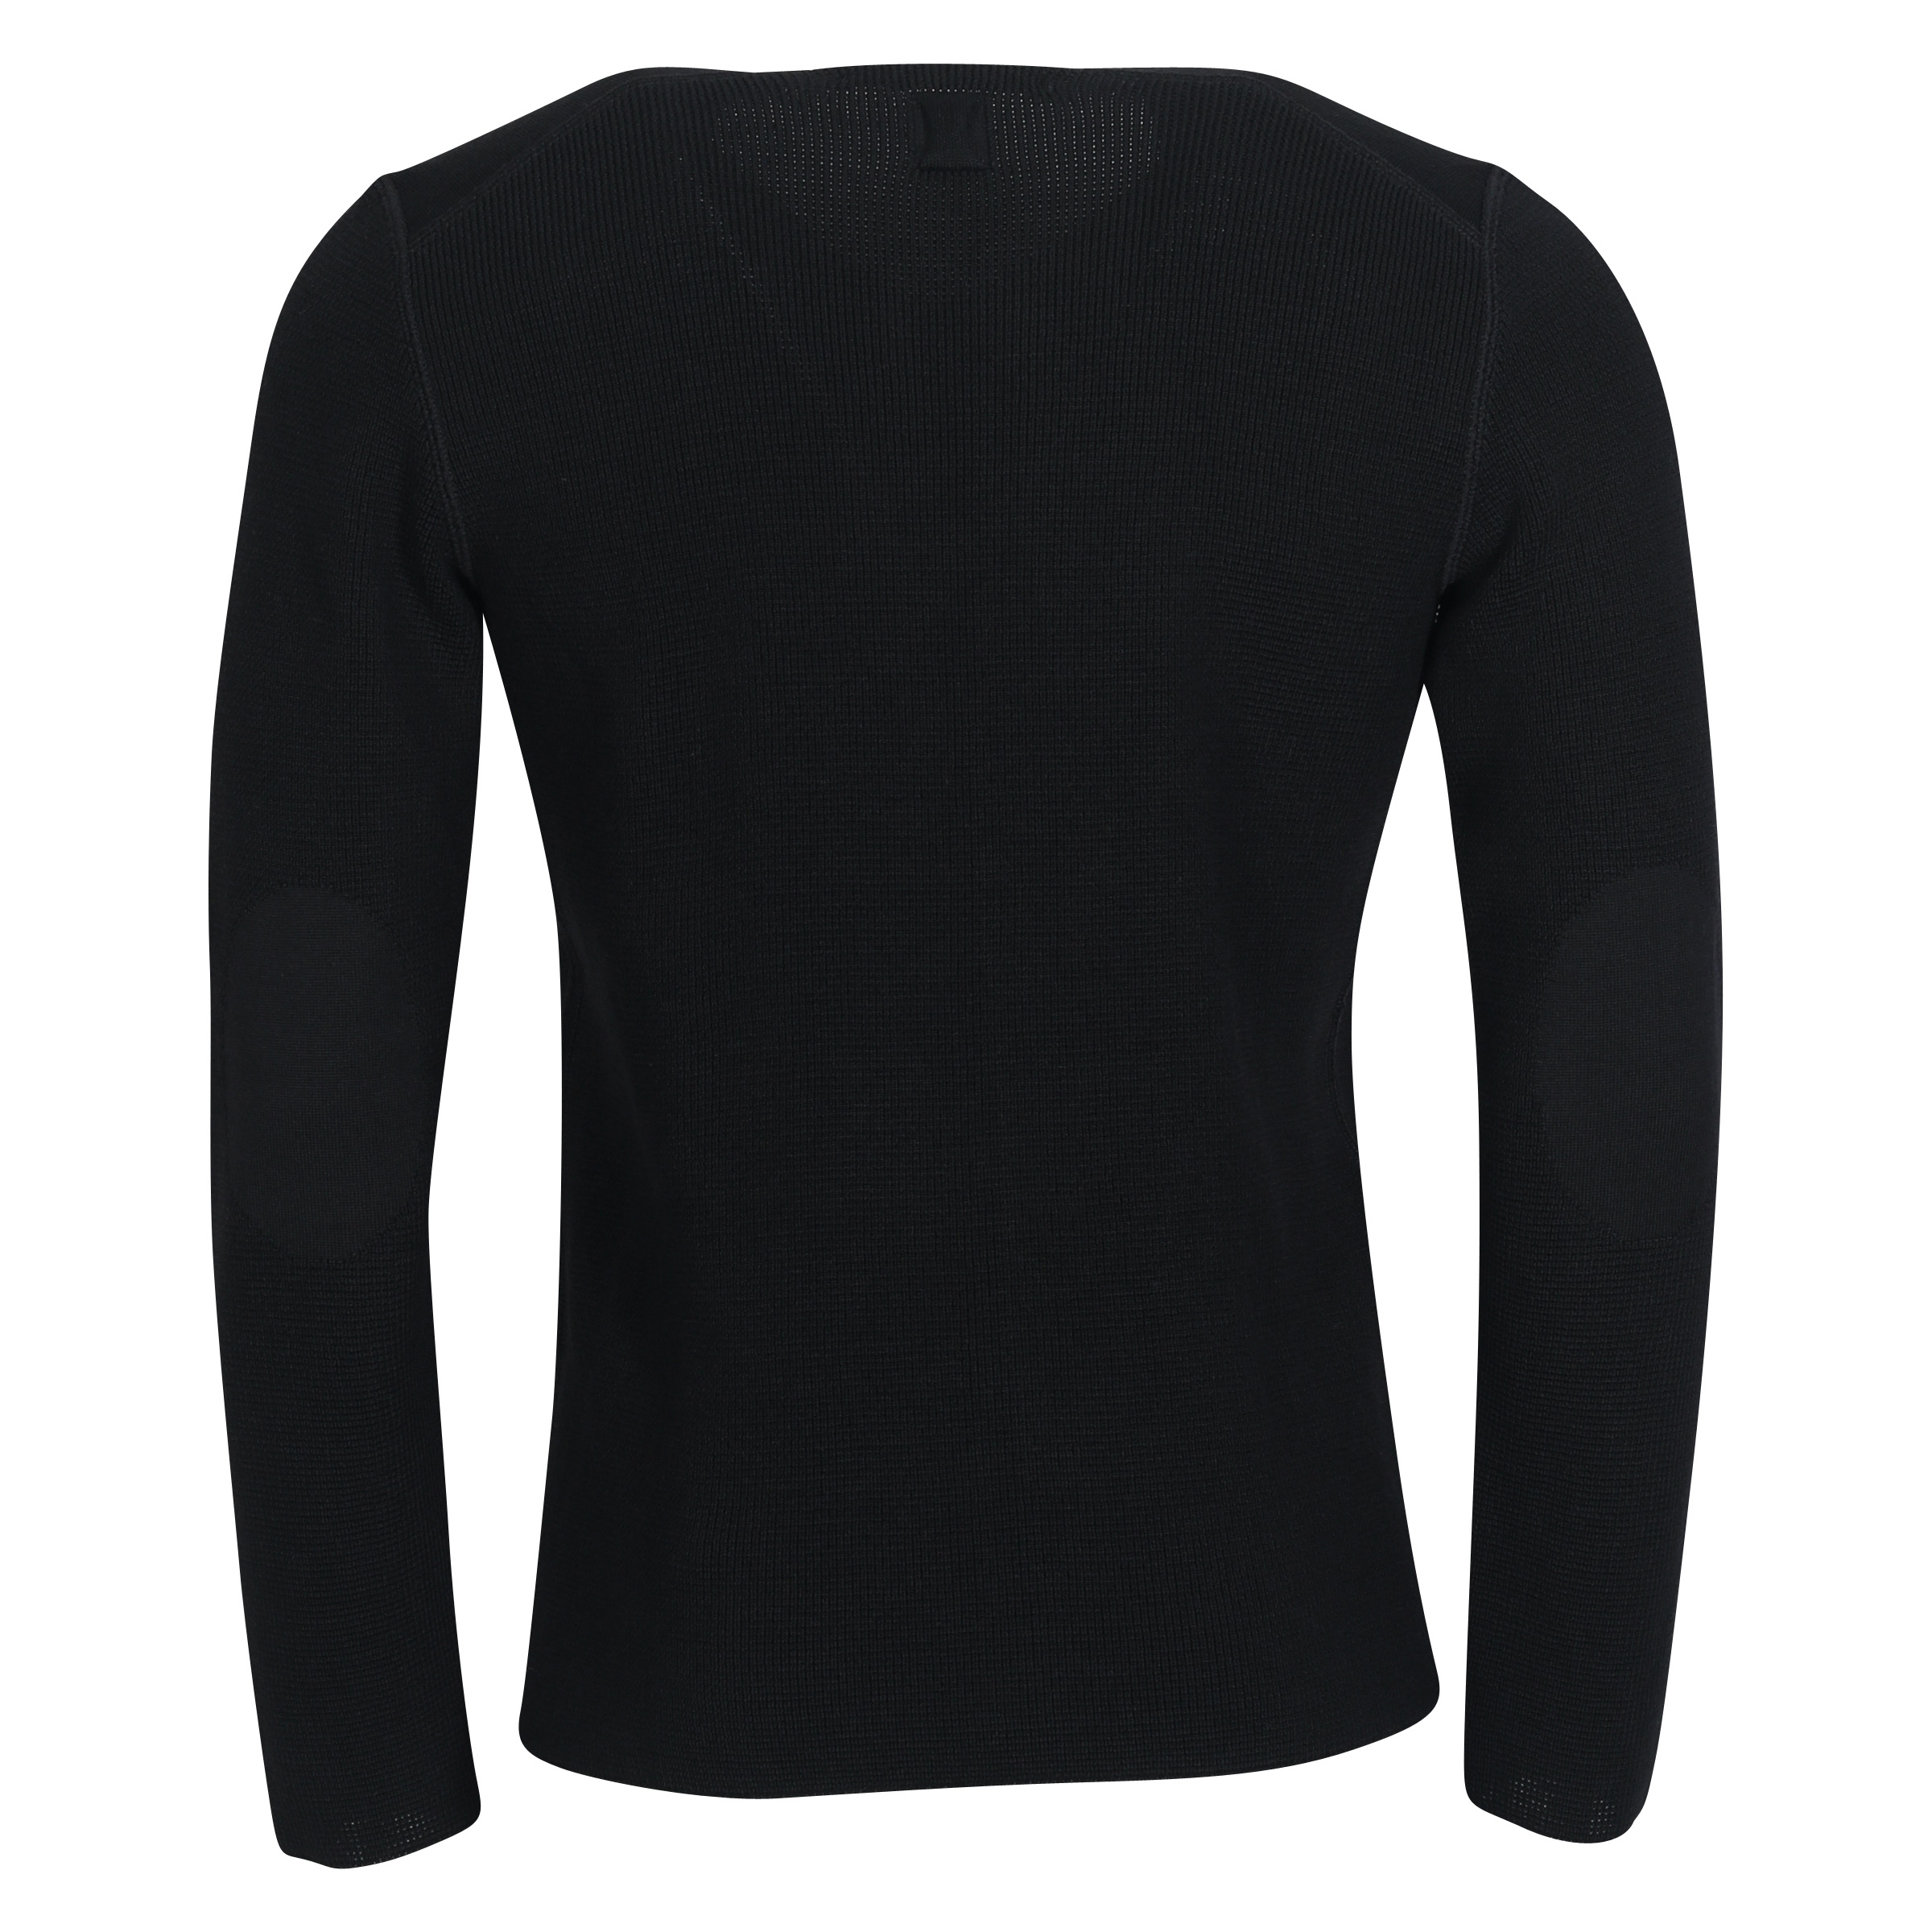 Hannes Roether Knit V-Neck Sweater in Black